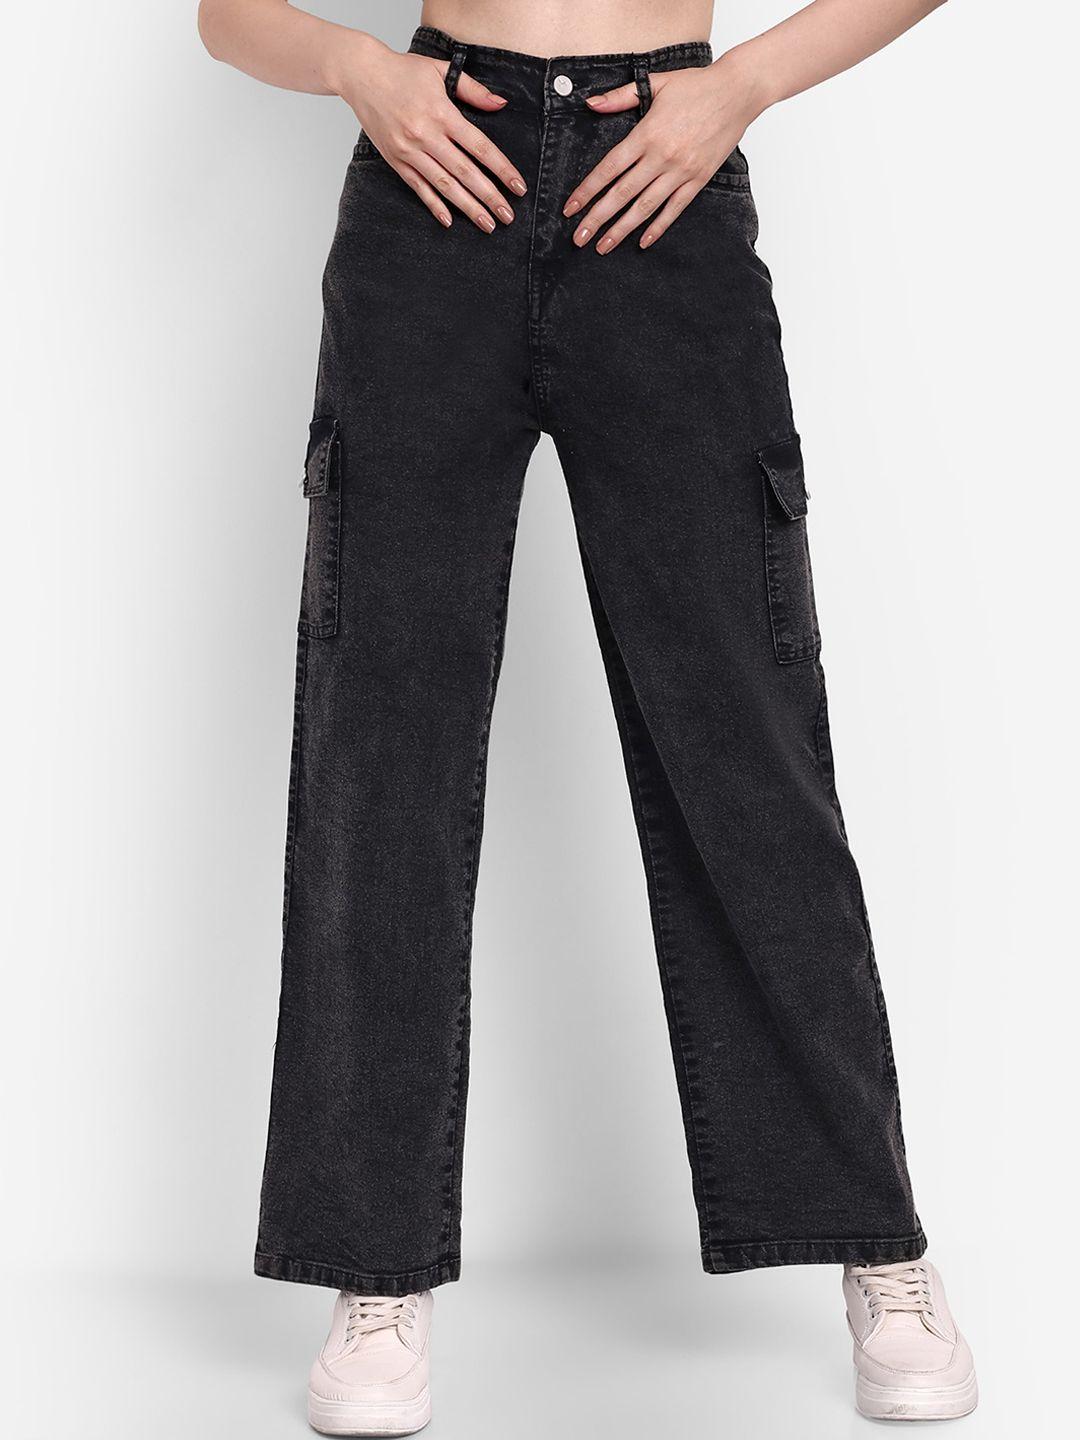 next-one-women-smart-wide-leg-high-rise-mildly-distressed-stretchable-jeans